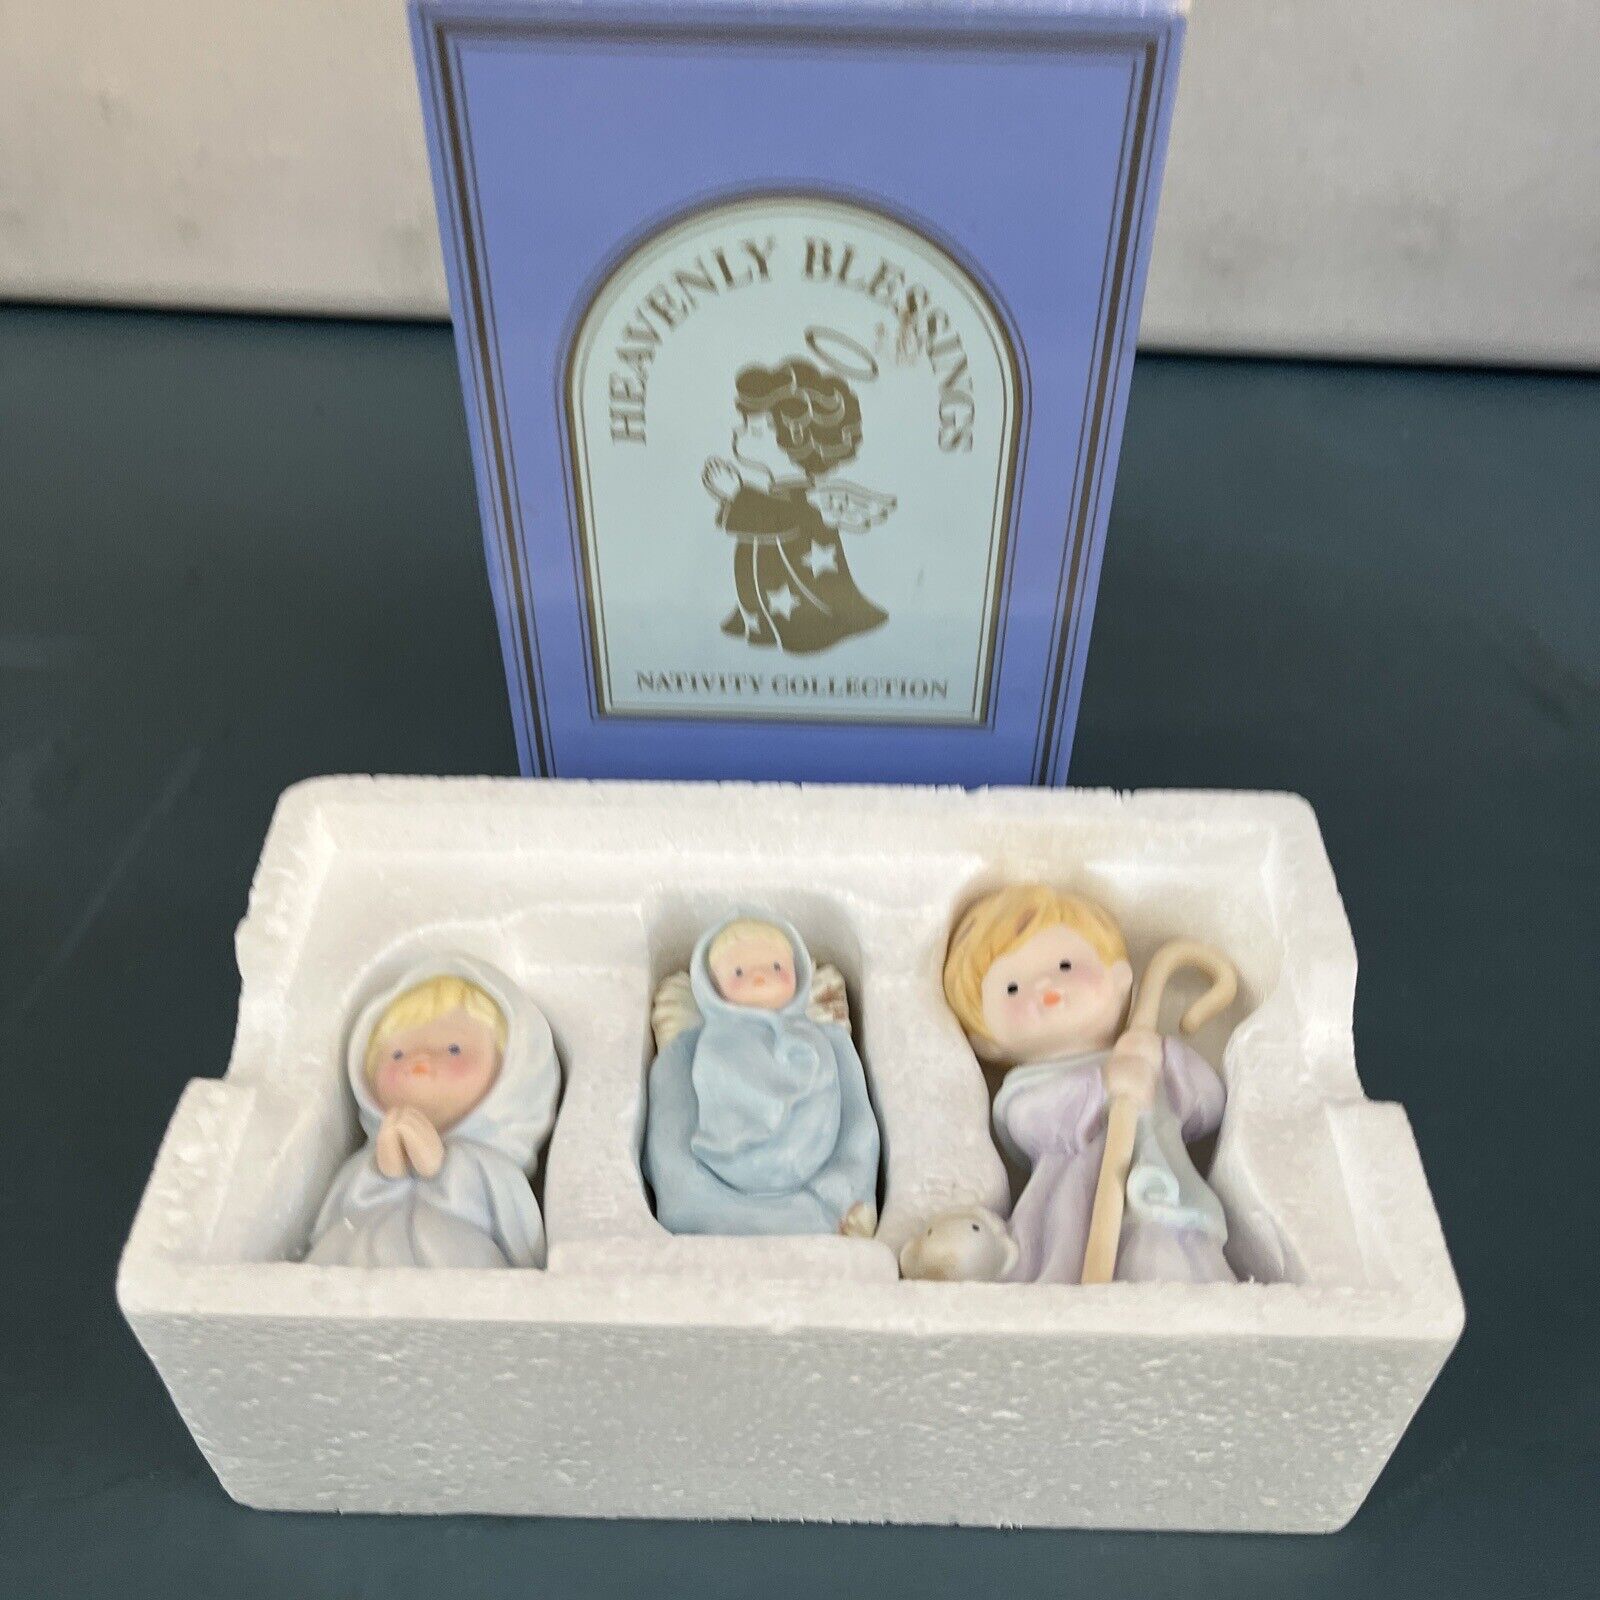 Avon Heavenly Blessings Nativity Collection: The Holy Family 3 PC Set 1986